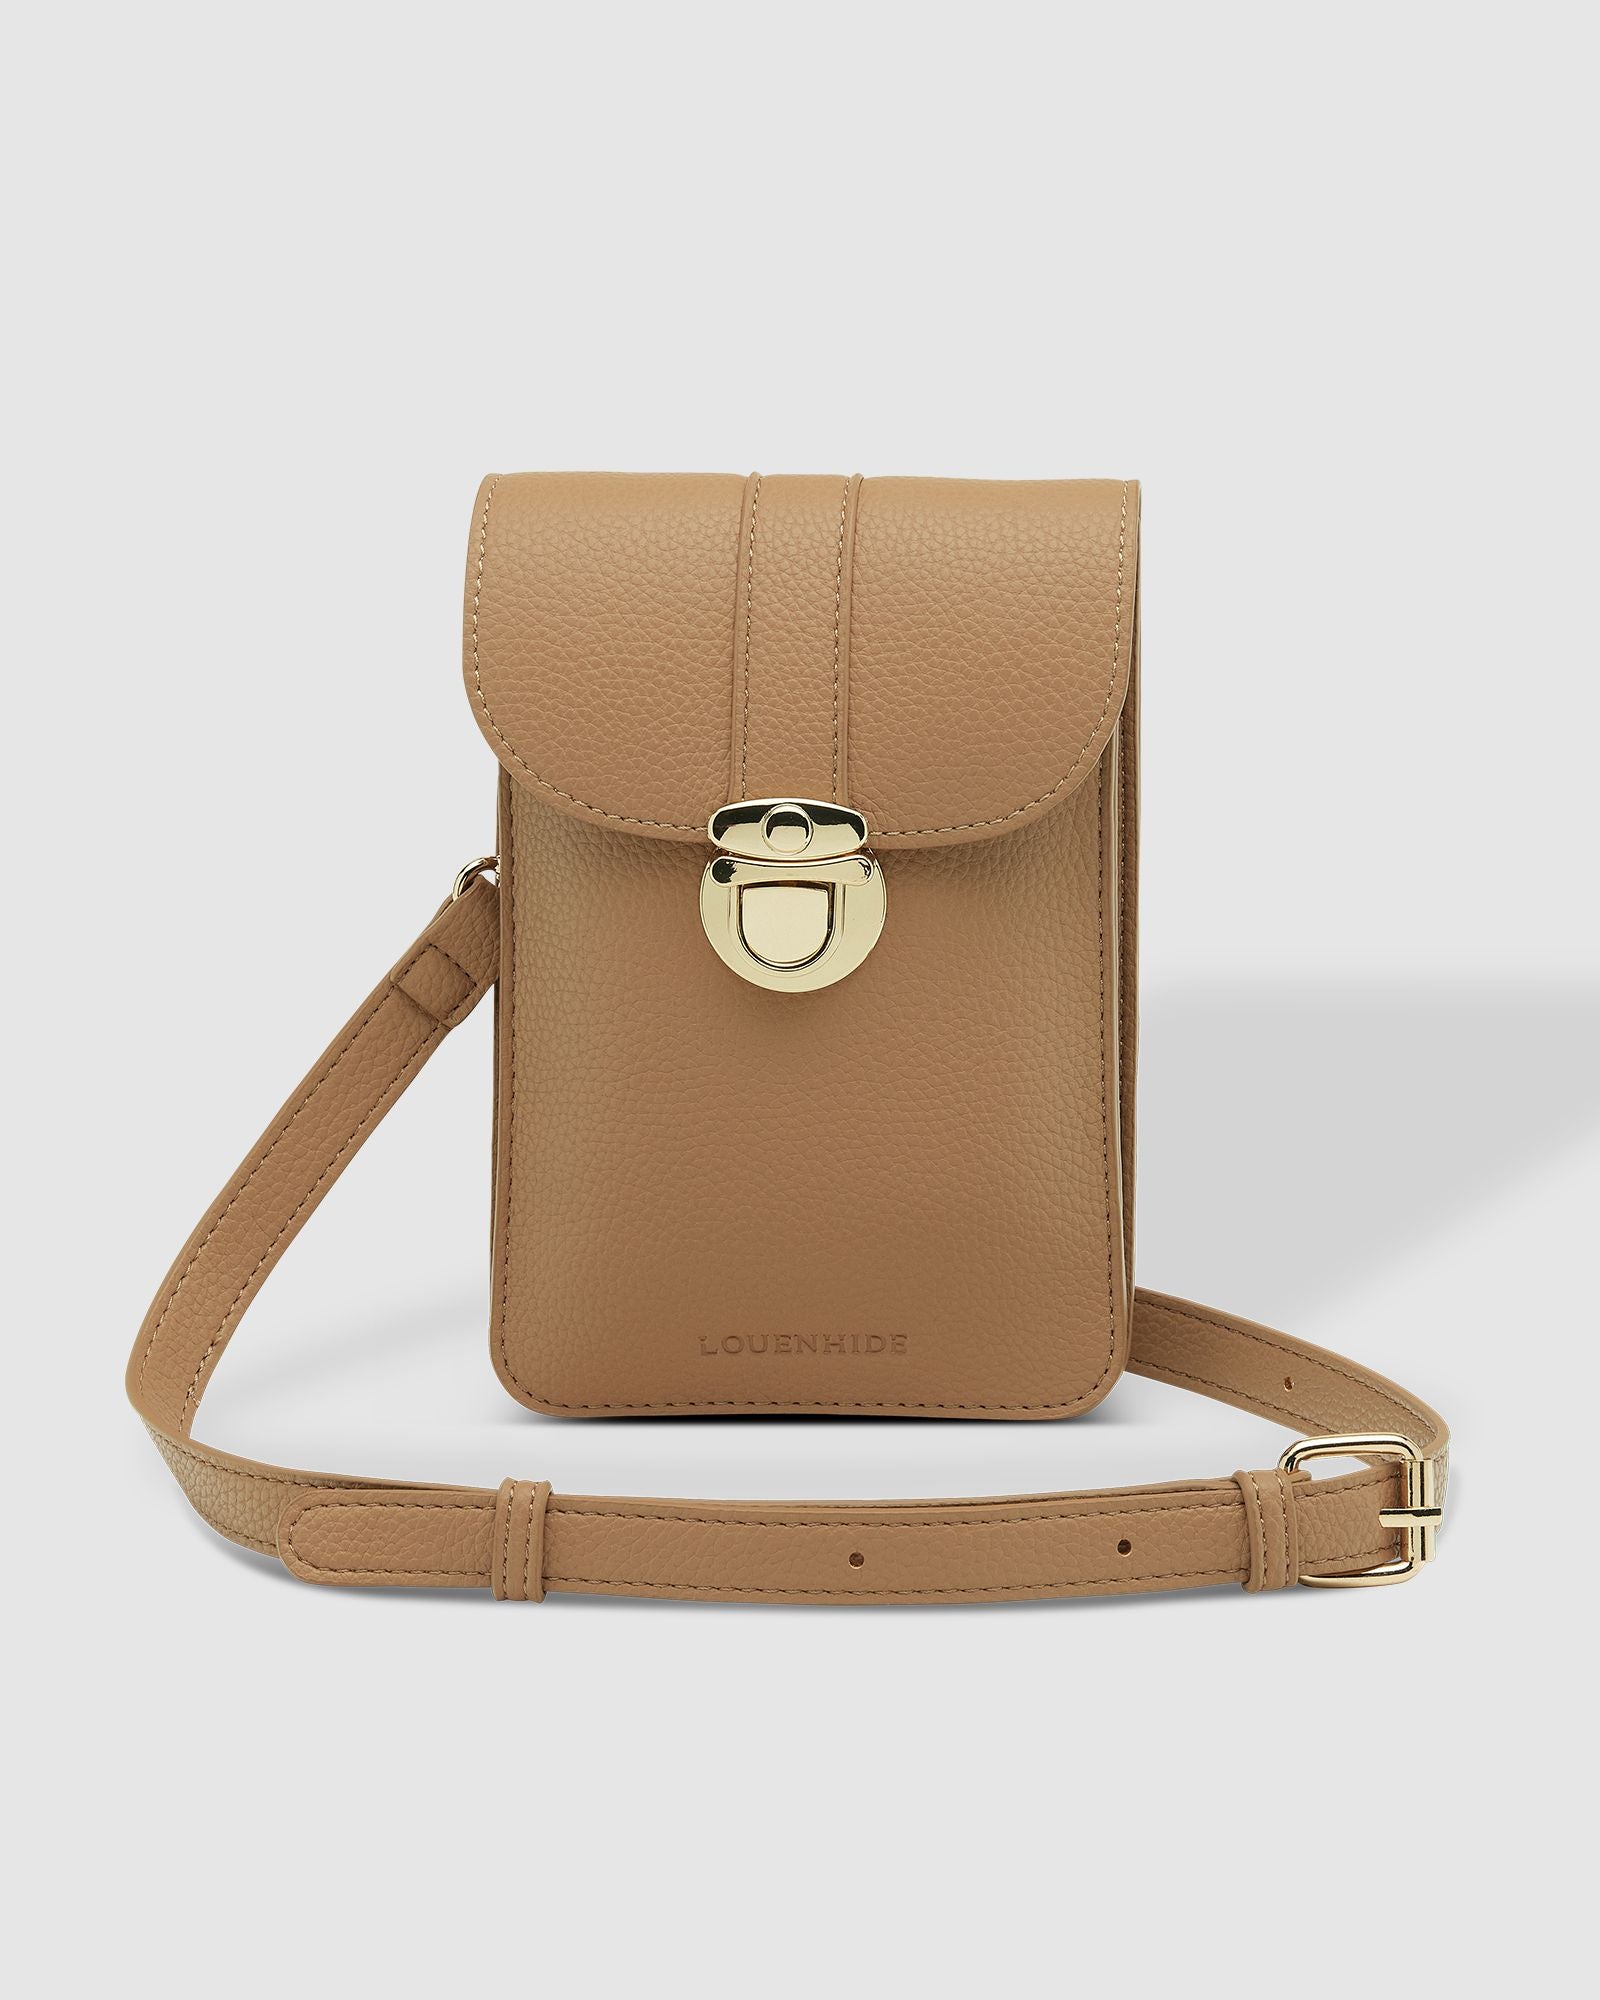 The Louenhide Fontaine Phone Crossbody Bag is the perfect accessory. While offering versatility and fuss-free functionality to your day-to-day life, you can keep your phone and everyday essentials within reach without sacrificing style.